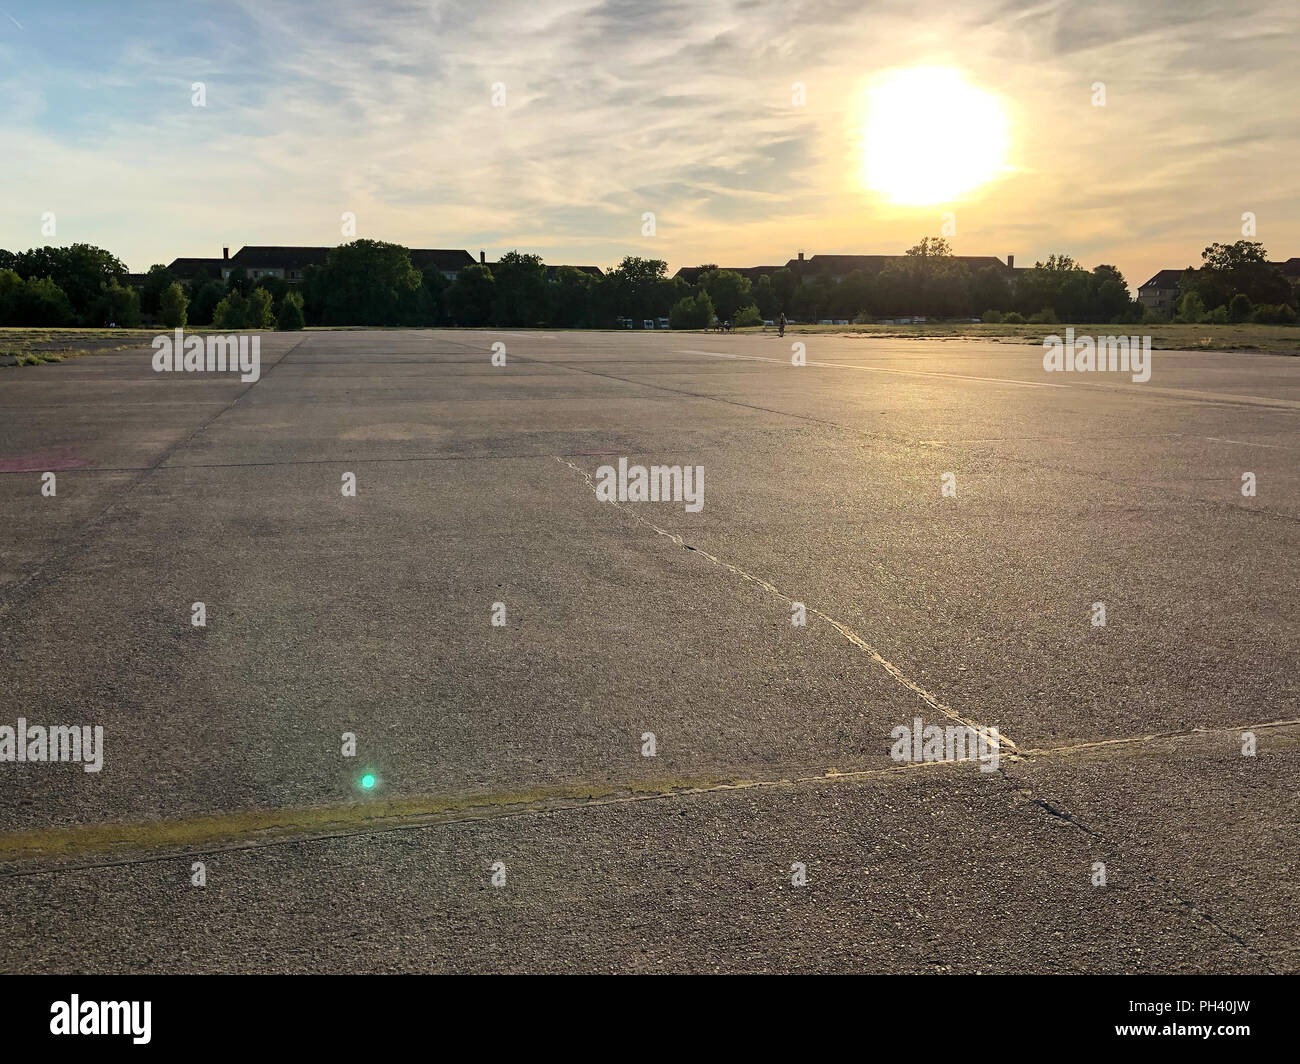 Summer sunset at Tempelhofer Feld, a park at a former airport in Berlin, Germany in 2018. Stock Photo